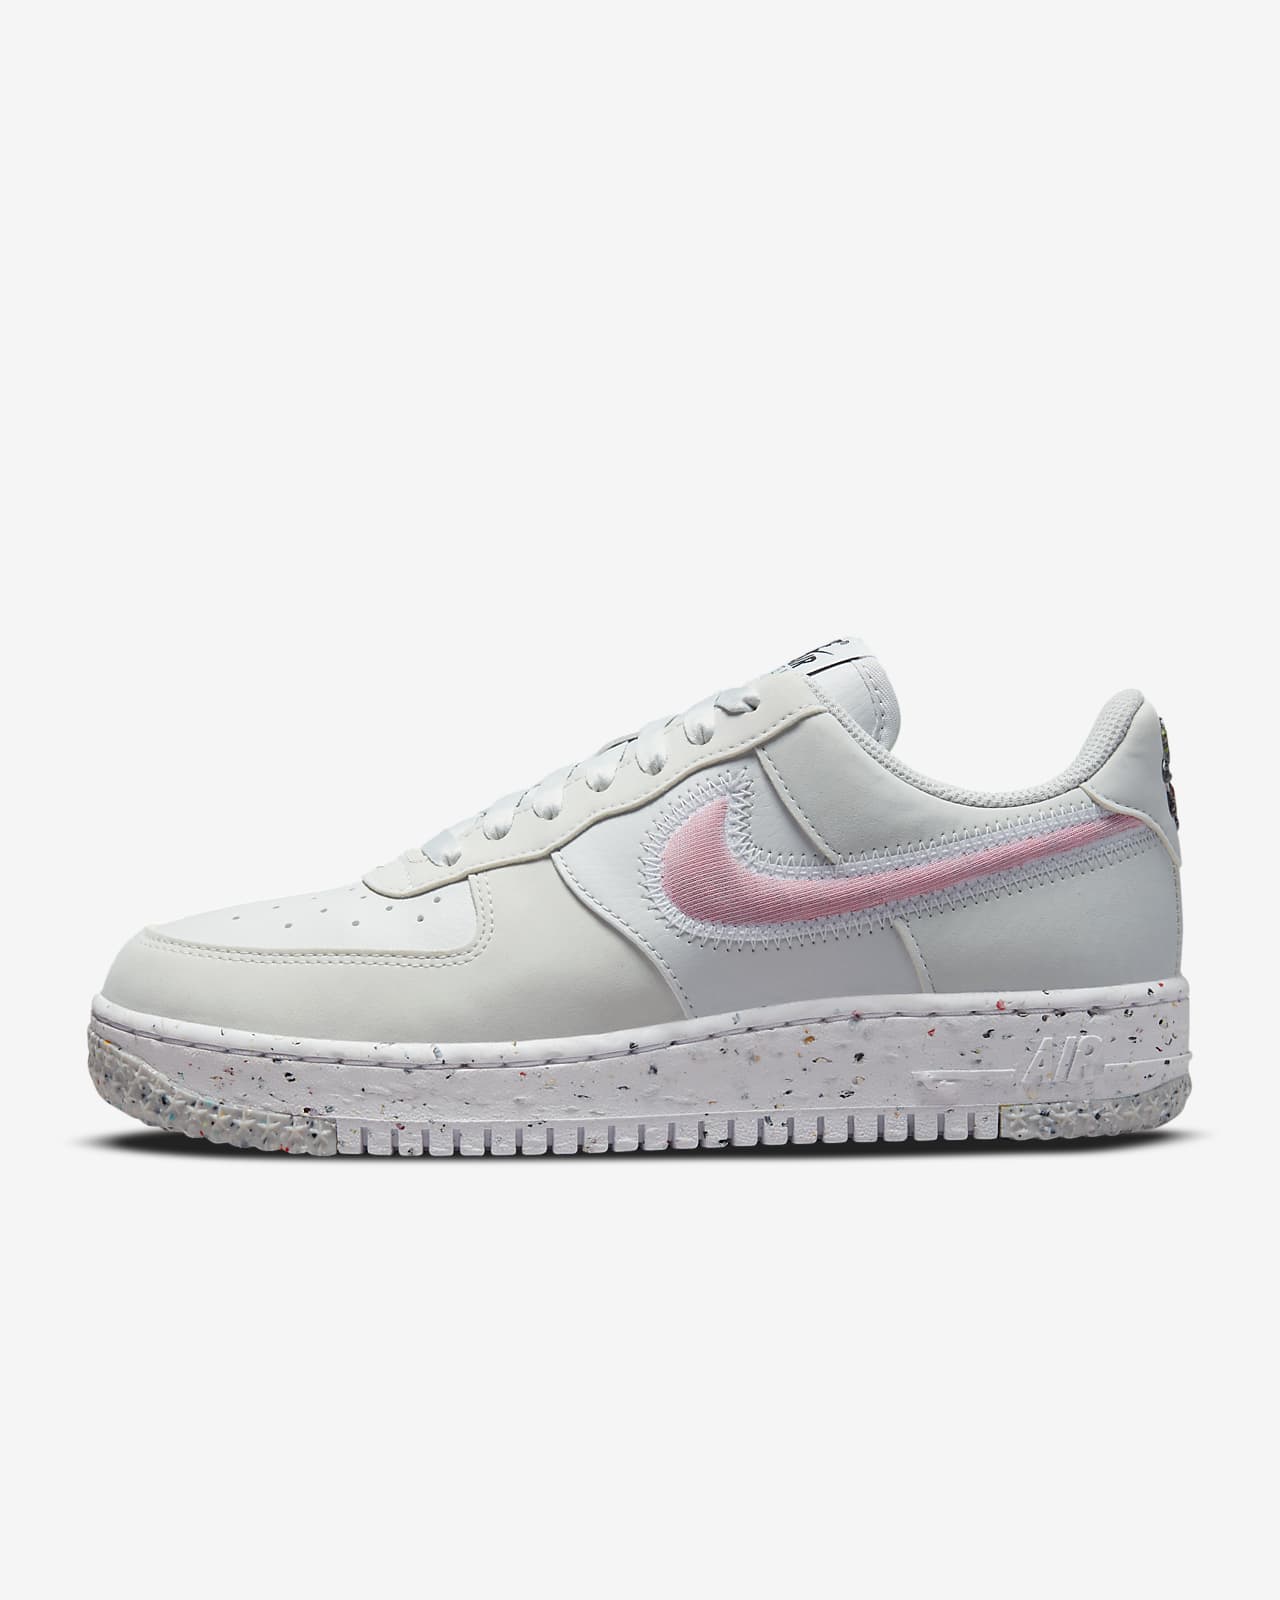 contrast position provide Nike Air Force 1 Crater Women's Shoes. Nike.com